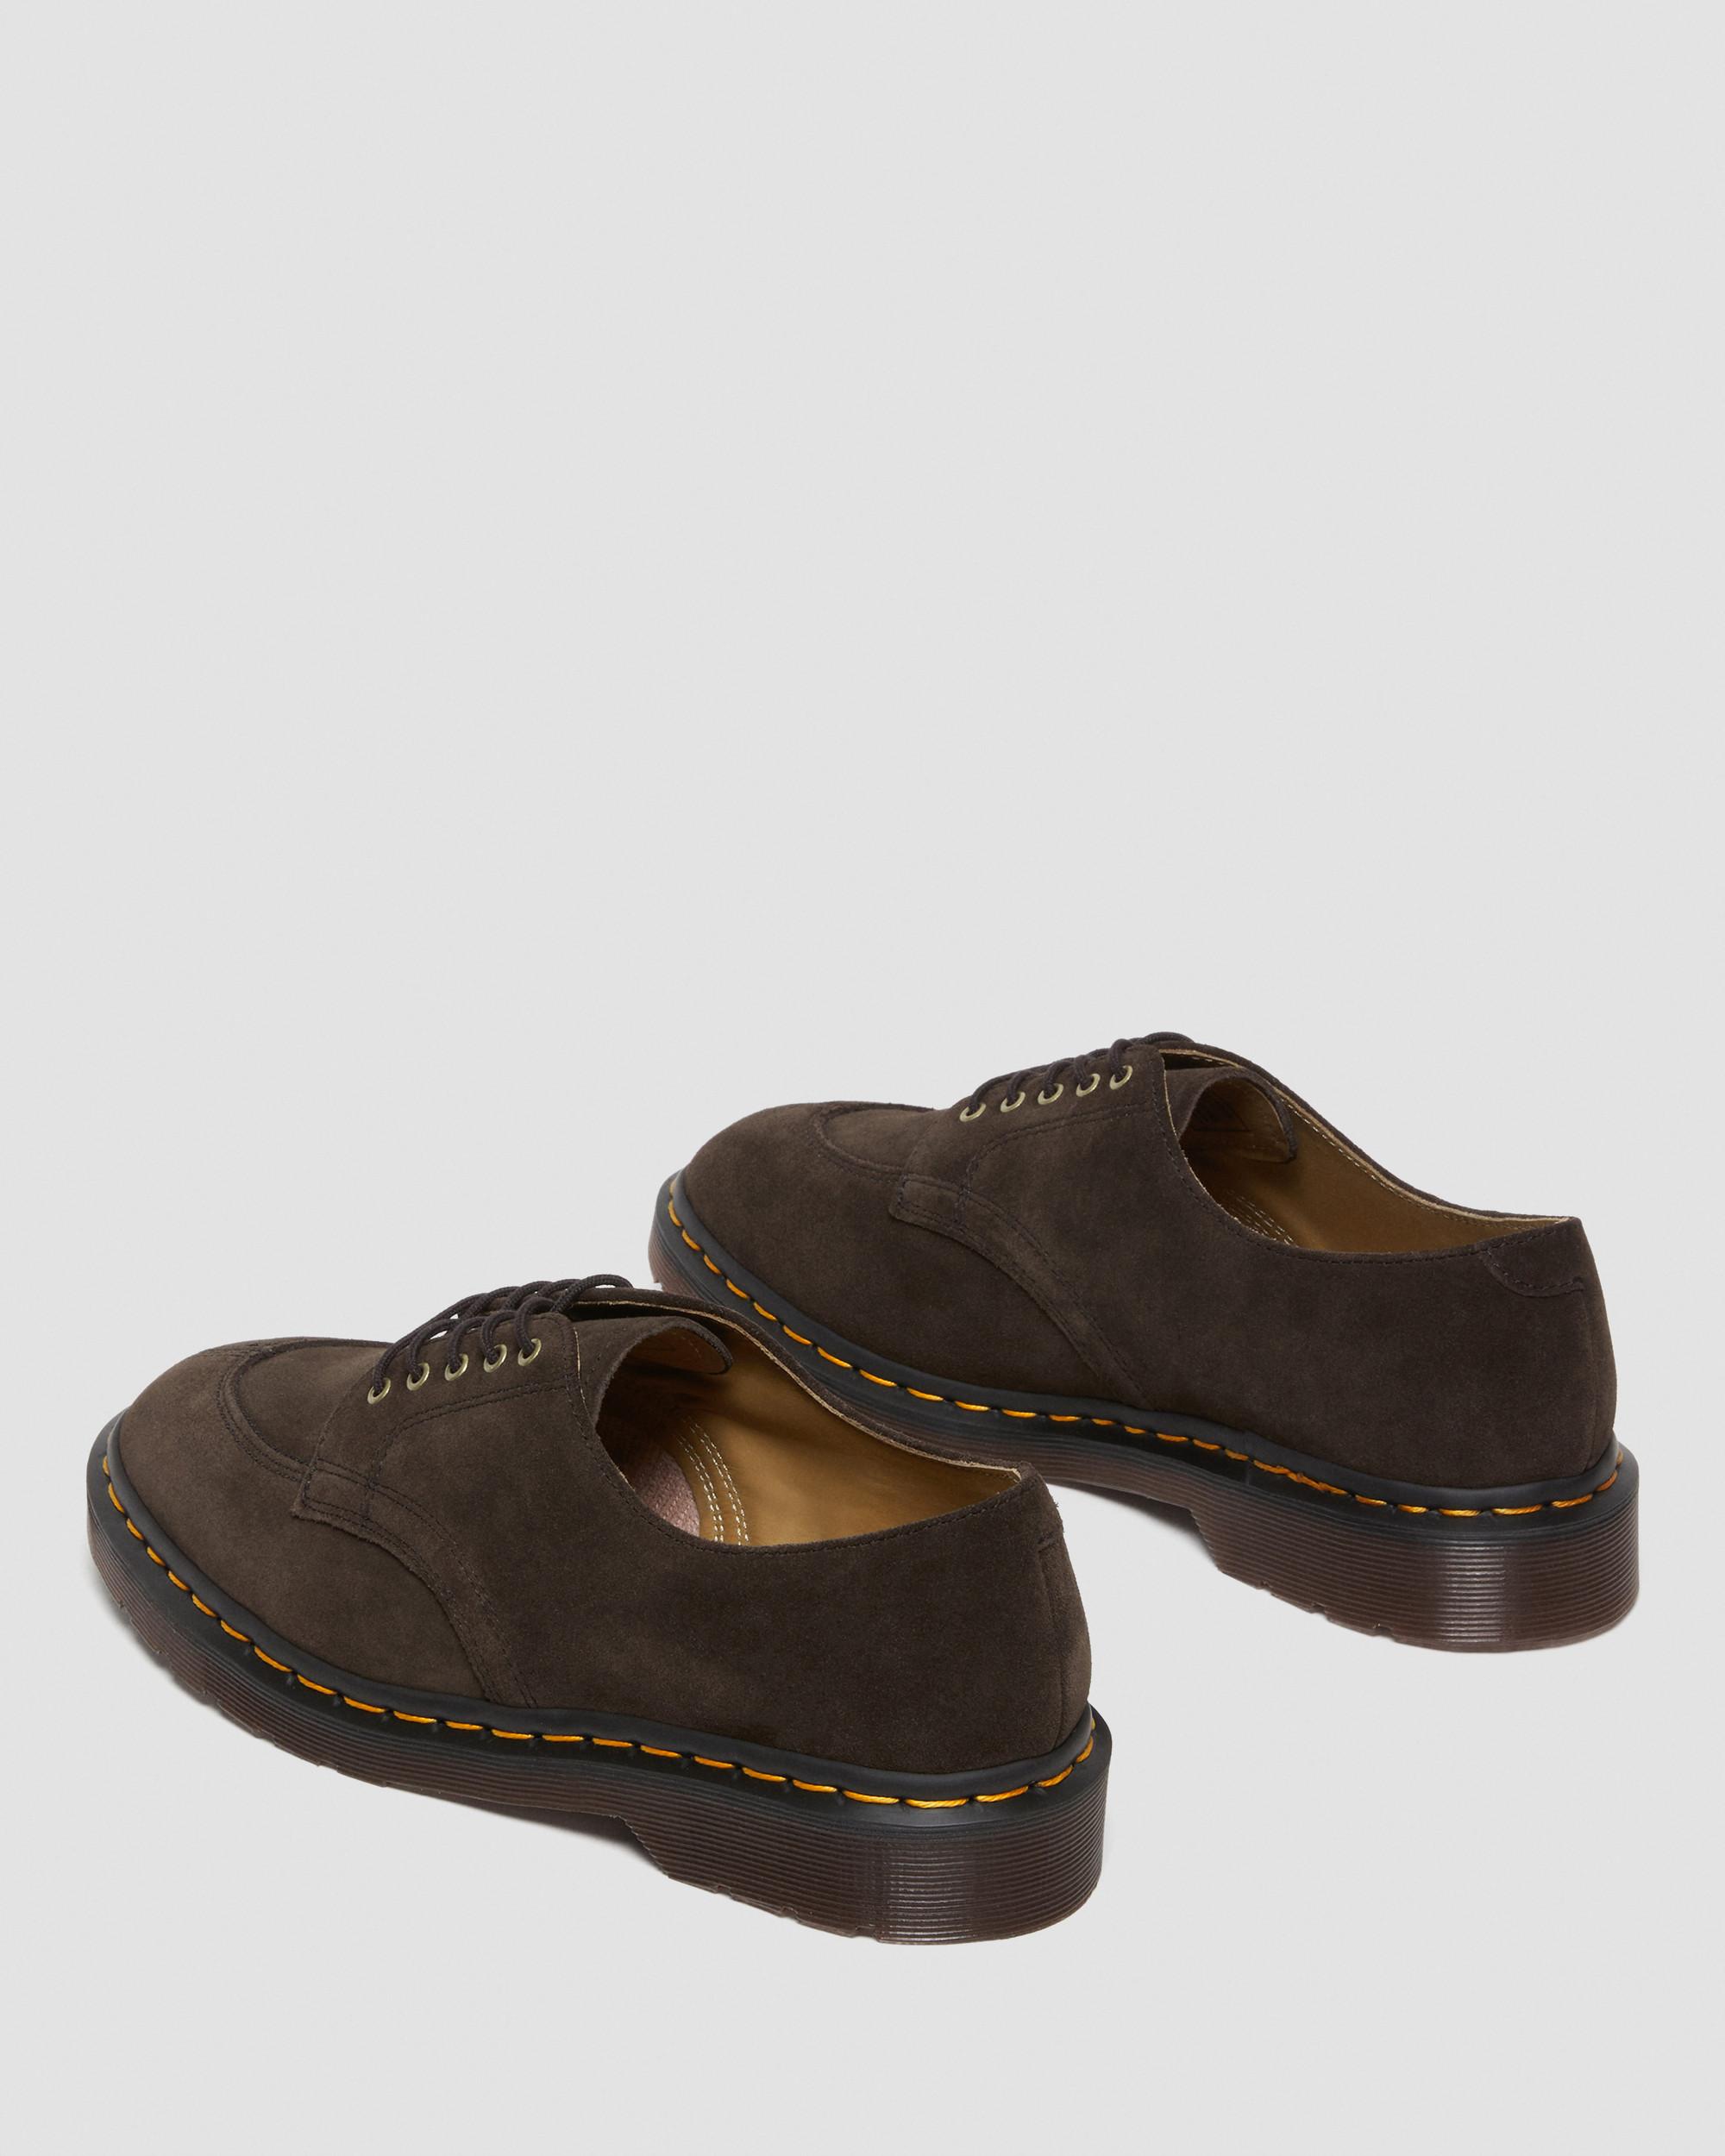 2046 Suede Shoes in Brown